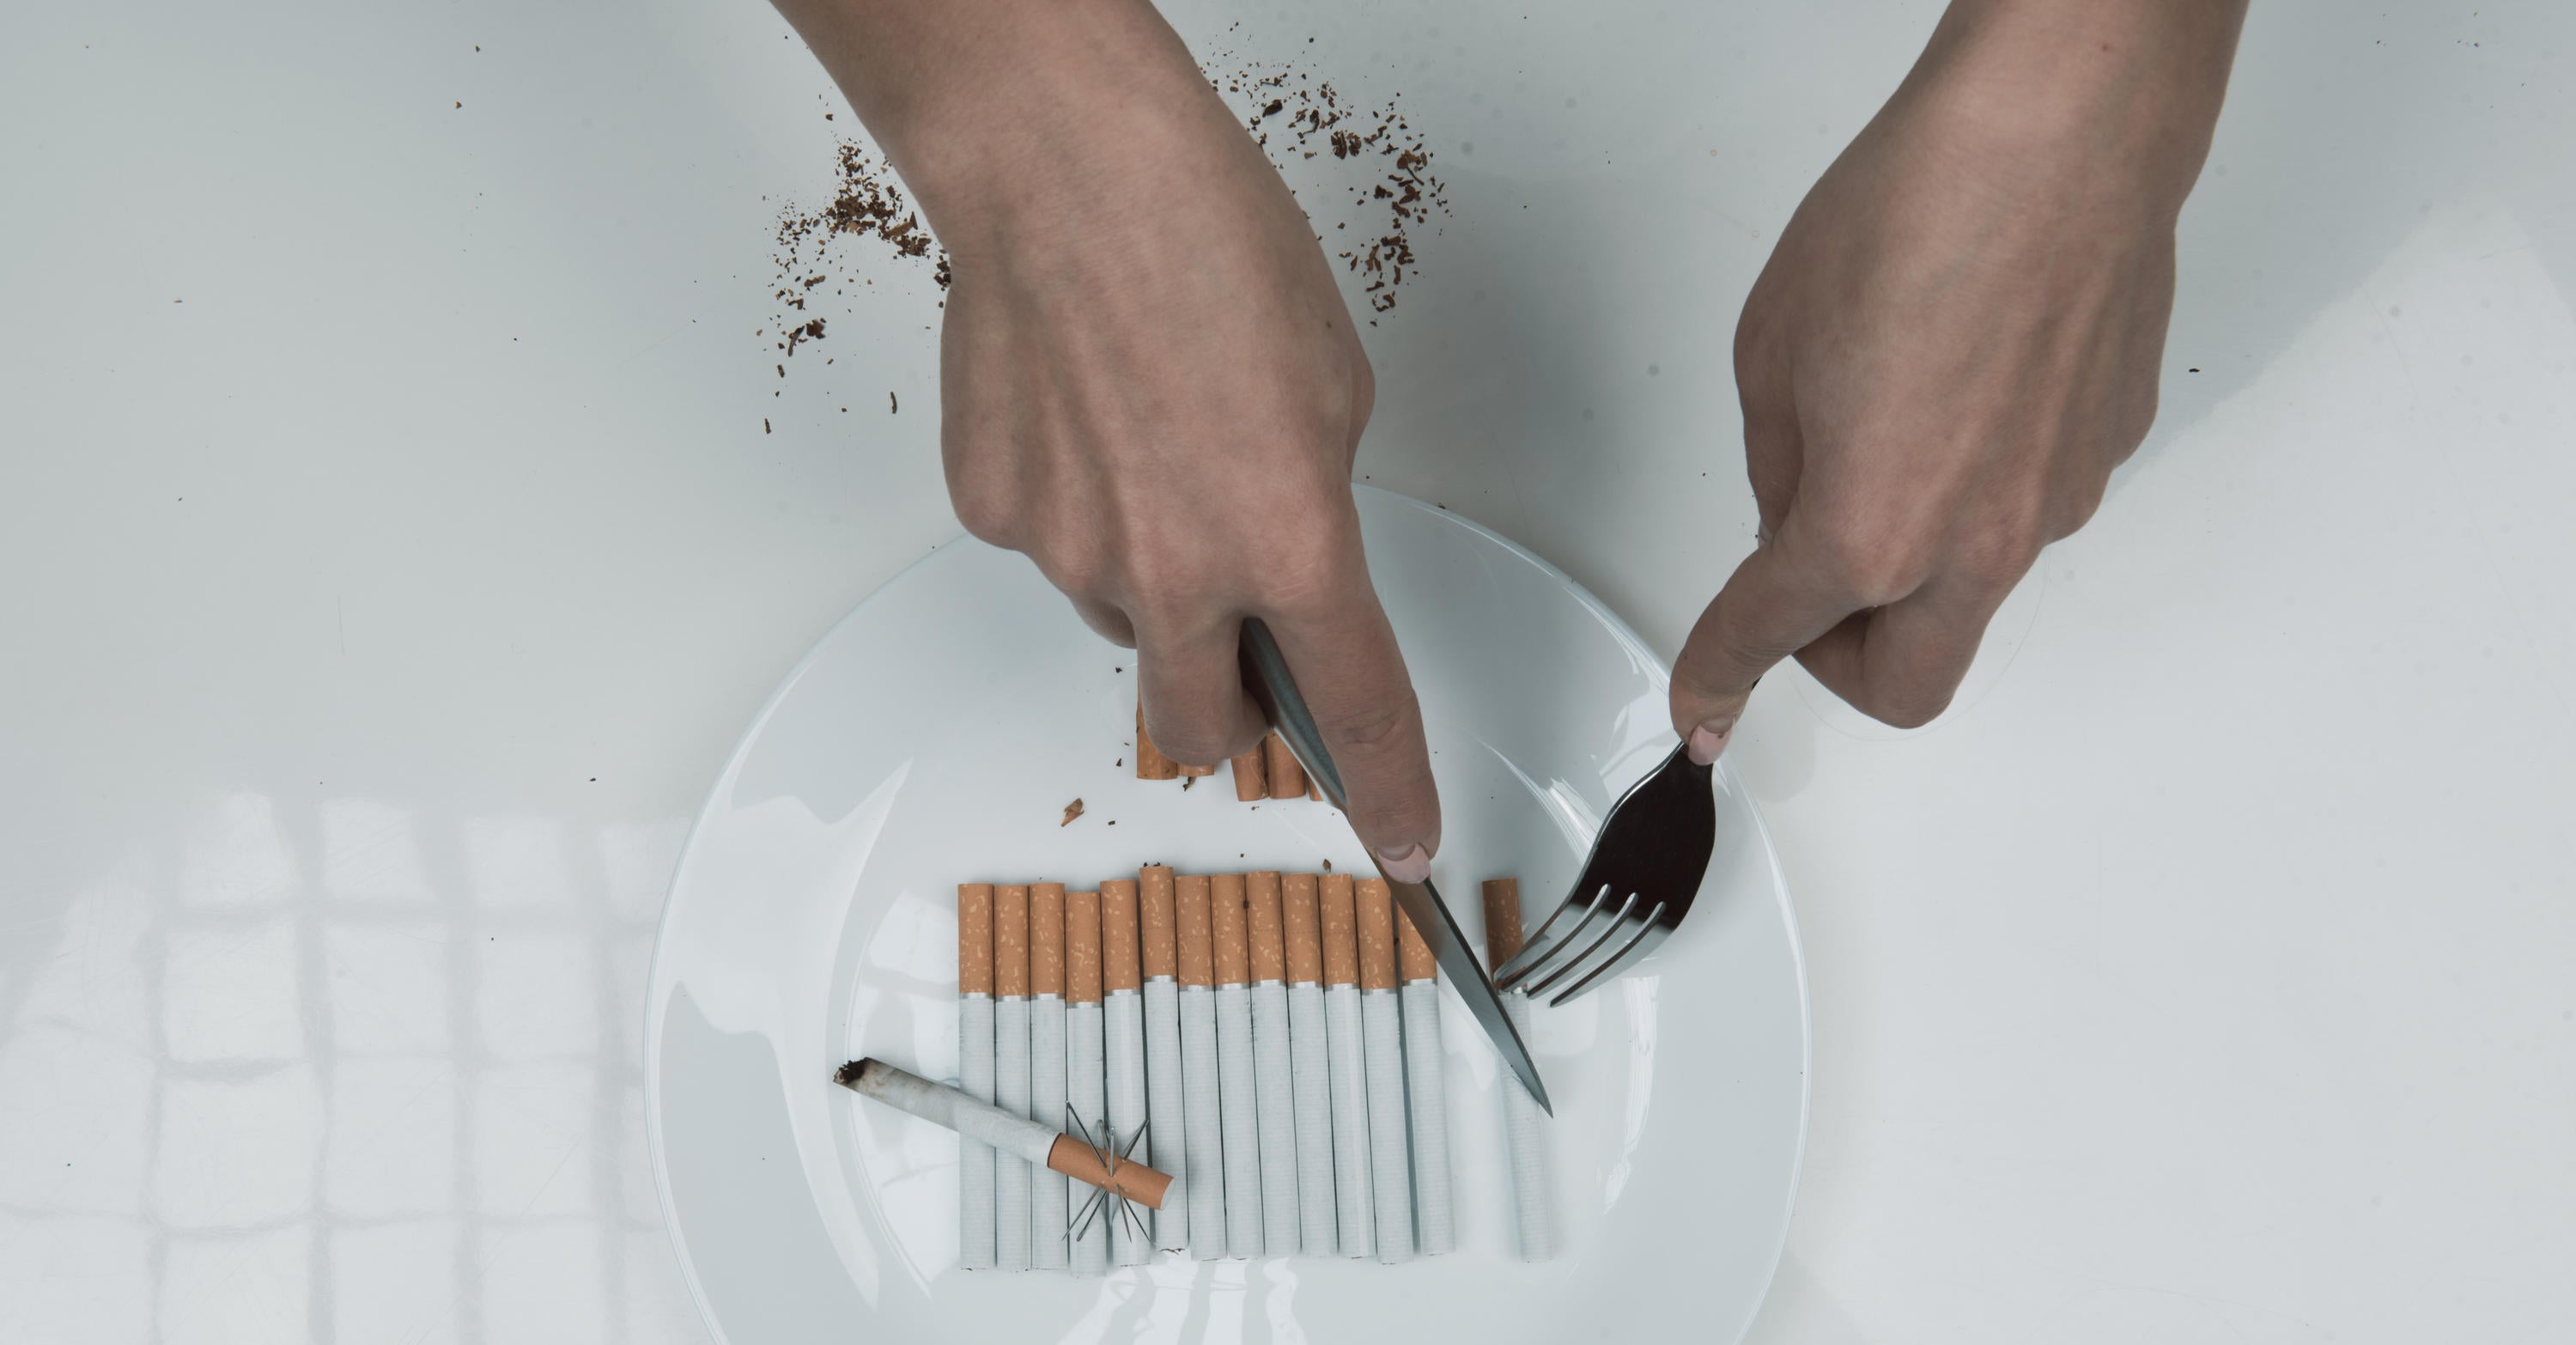 hands using knife and fork to cut cigarettes on a plate